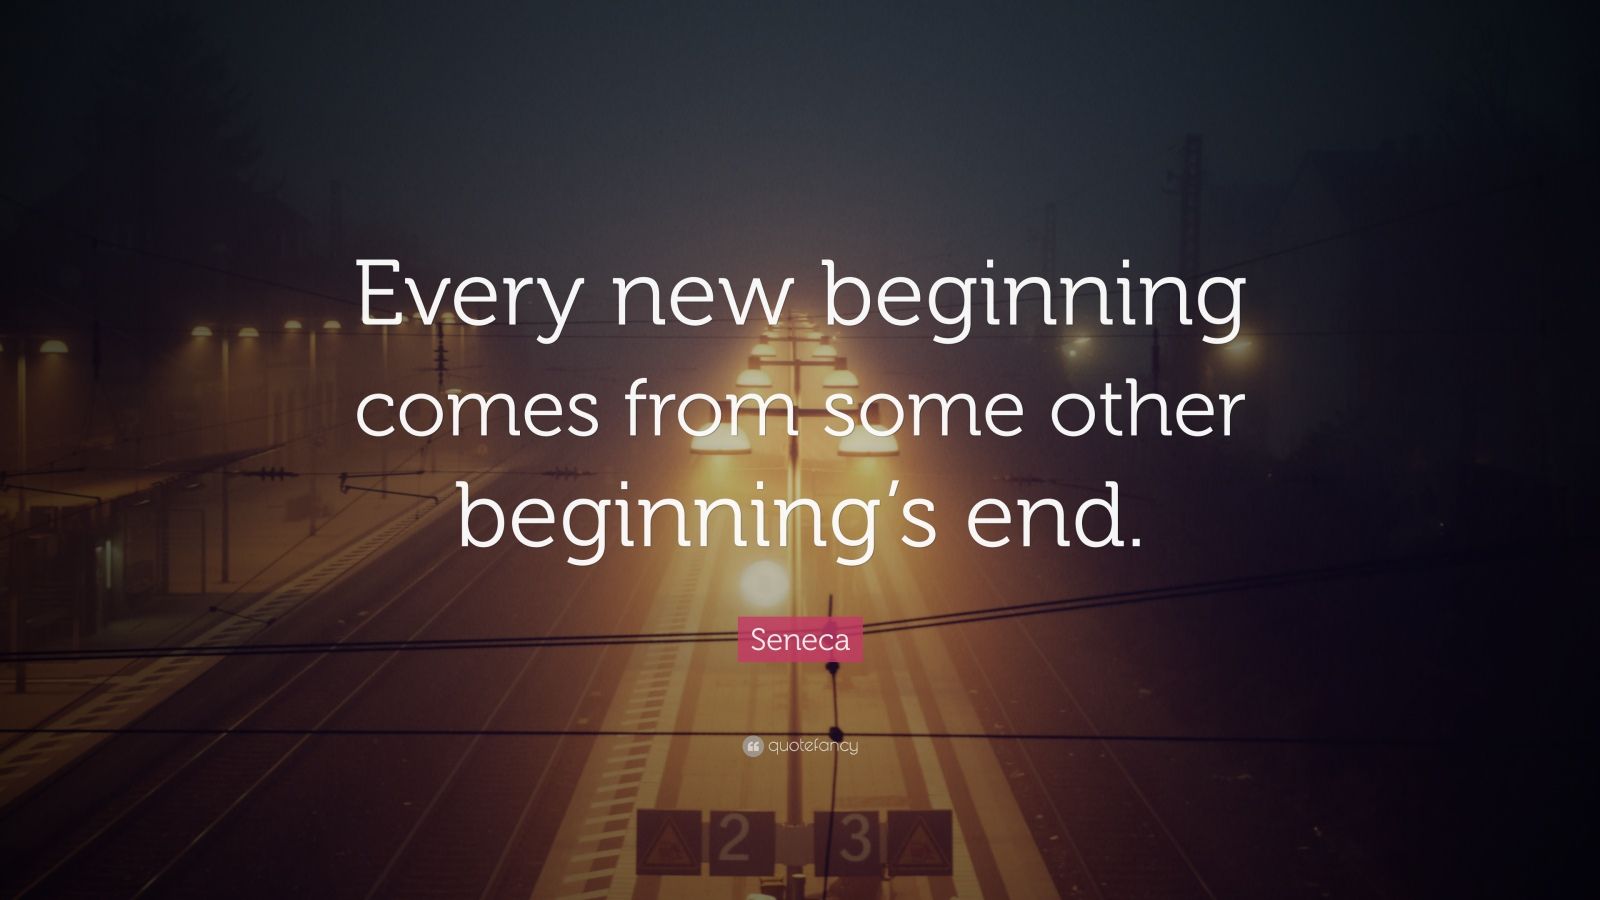 Seneca Quote: “Every new beginning comes from some other beginning’s